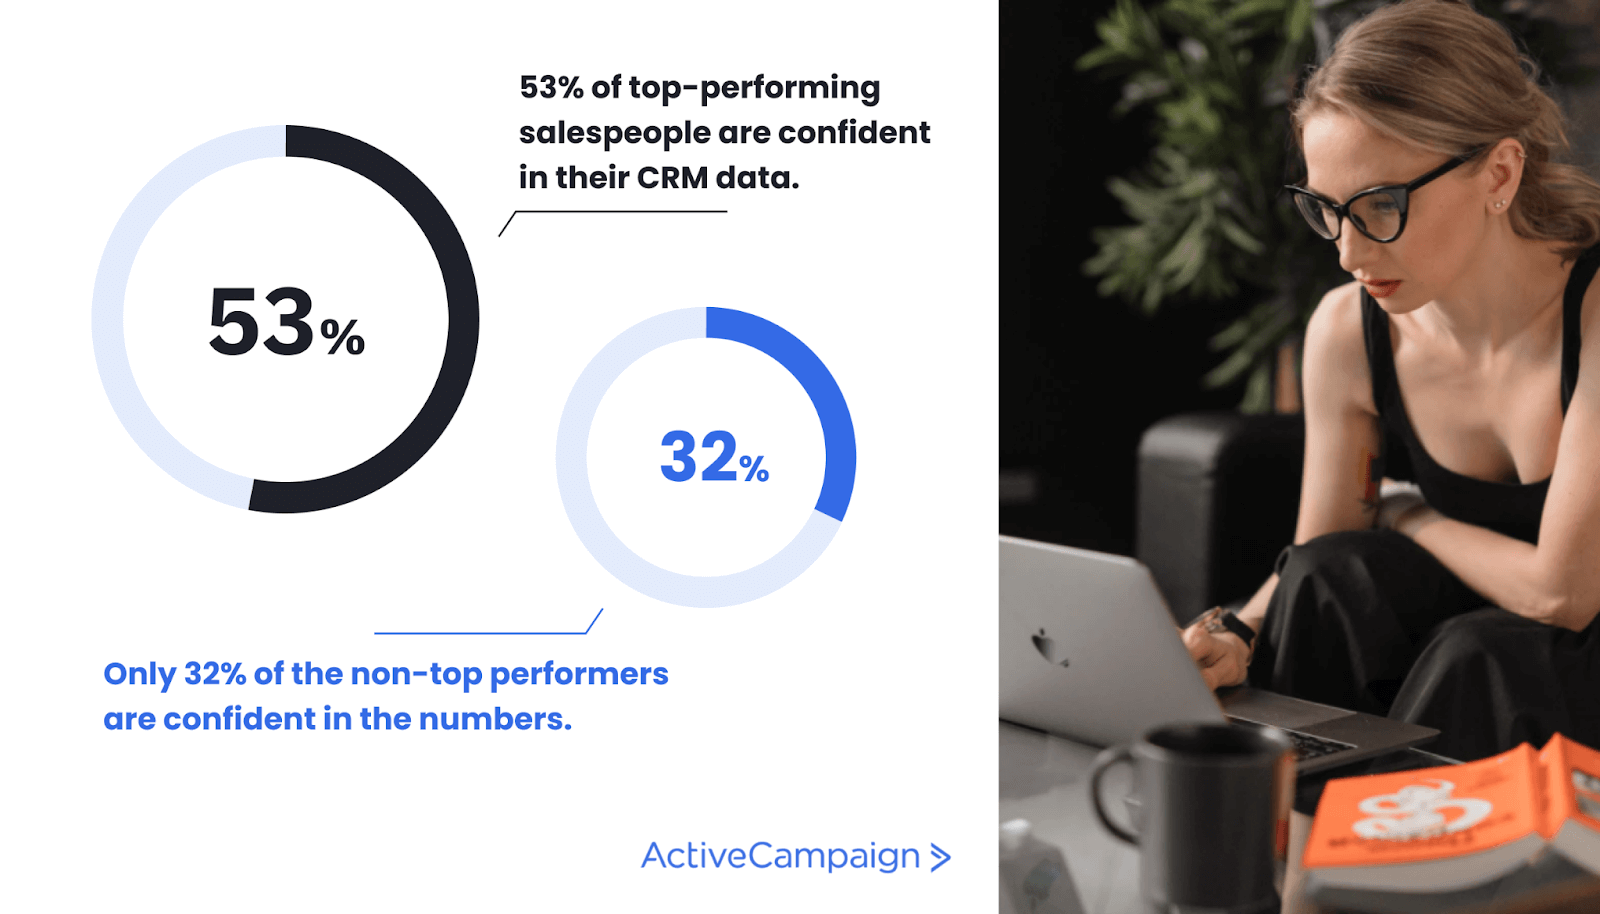 Graphic showing that 53% of top-performing salespeople are confident in their CRM data. Only 32% of the non-top performers are confident in the numbers.